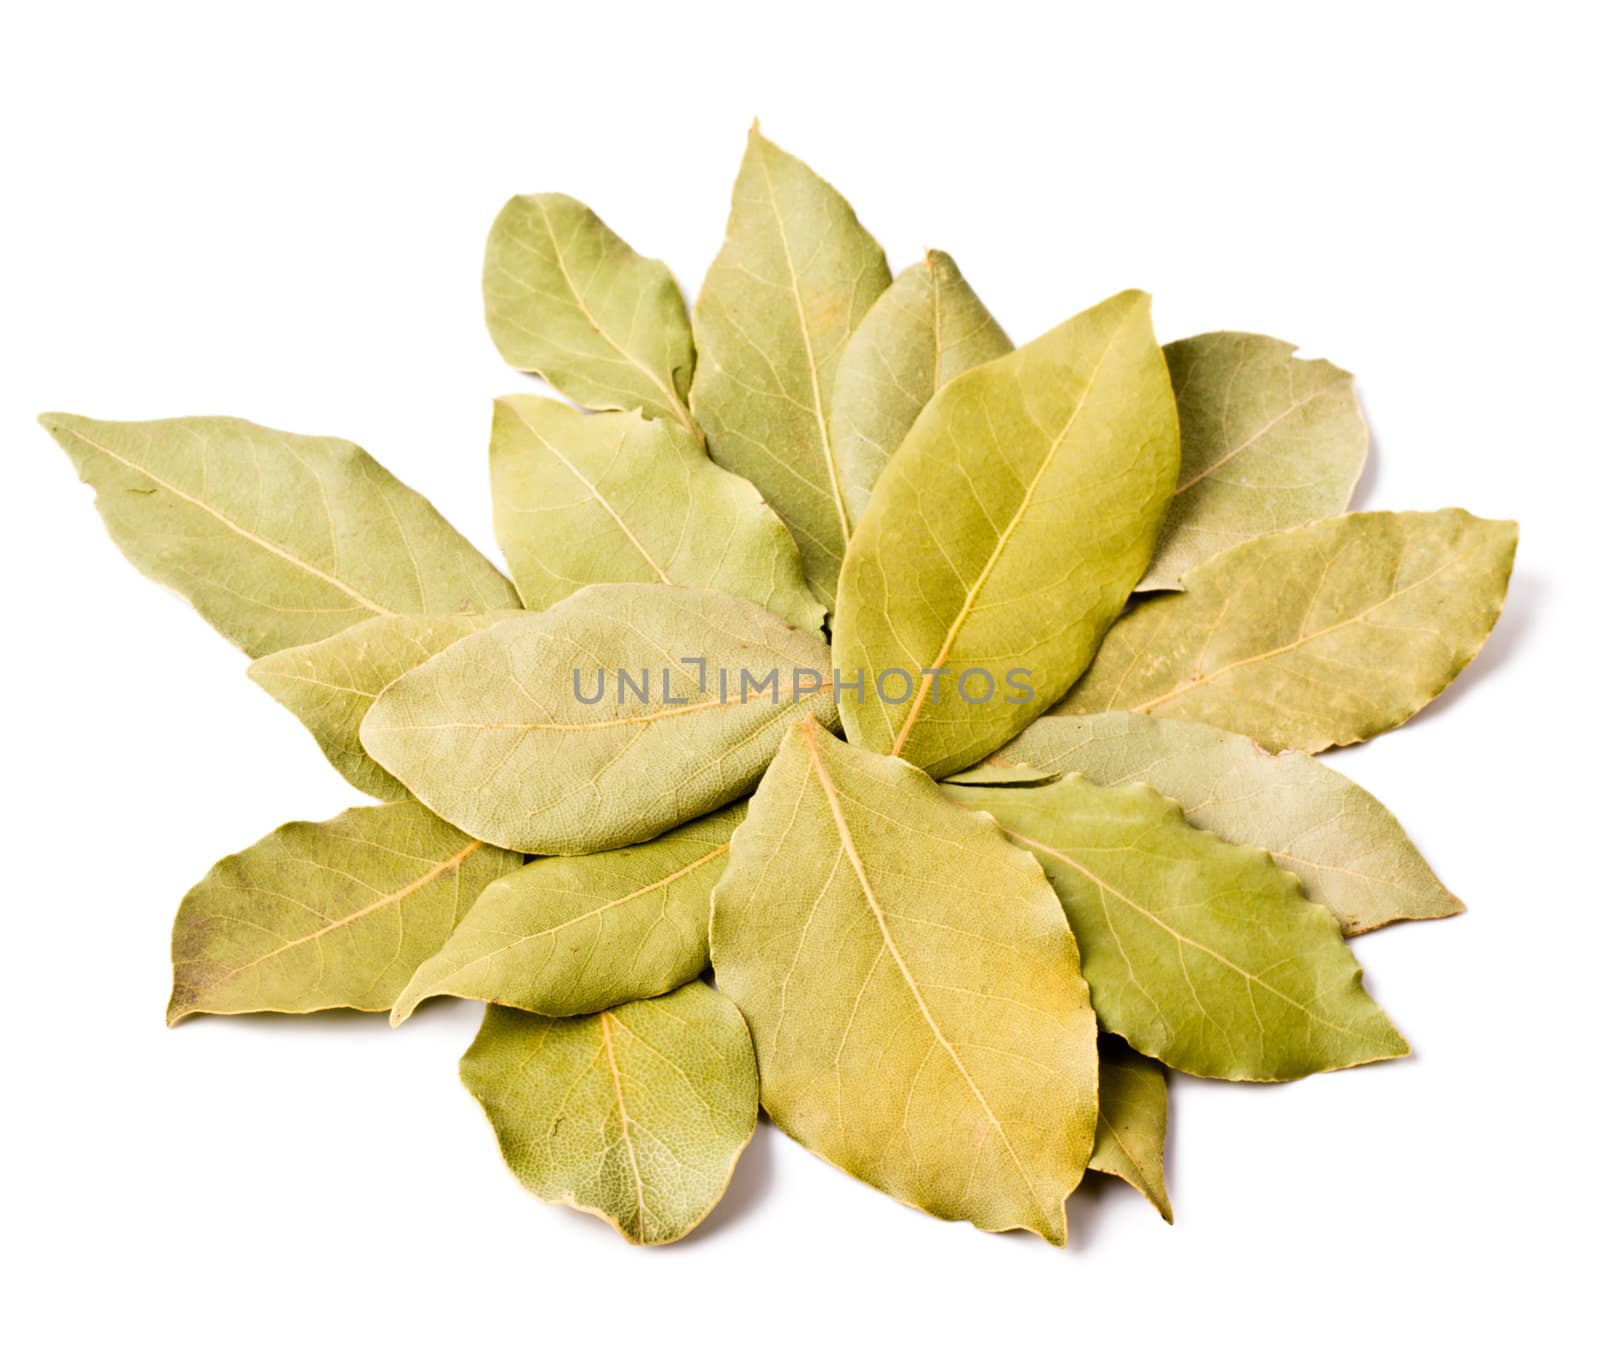 Pile of bay leaves isolated on white